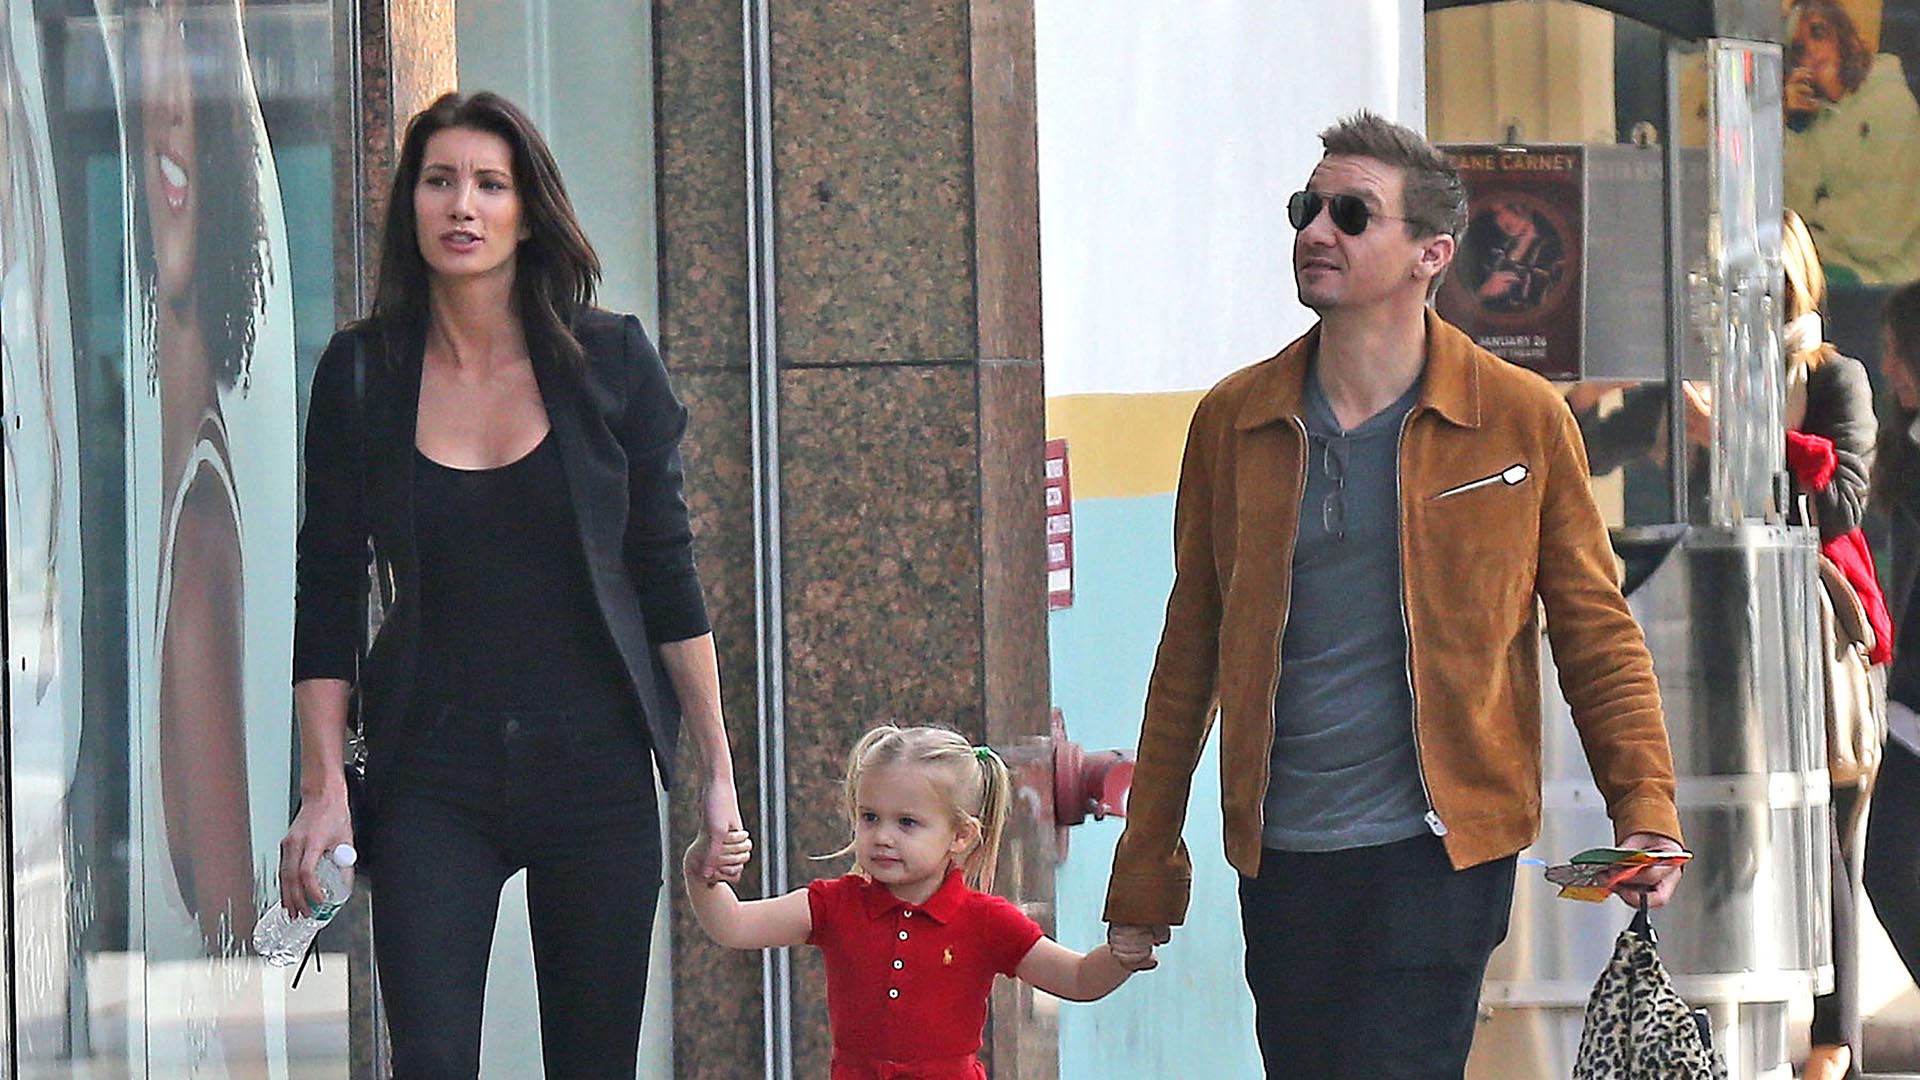   Jeremy Renner and his ex-wife Sonni Pacheco with their daughter Ava